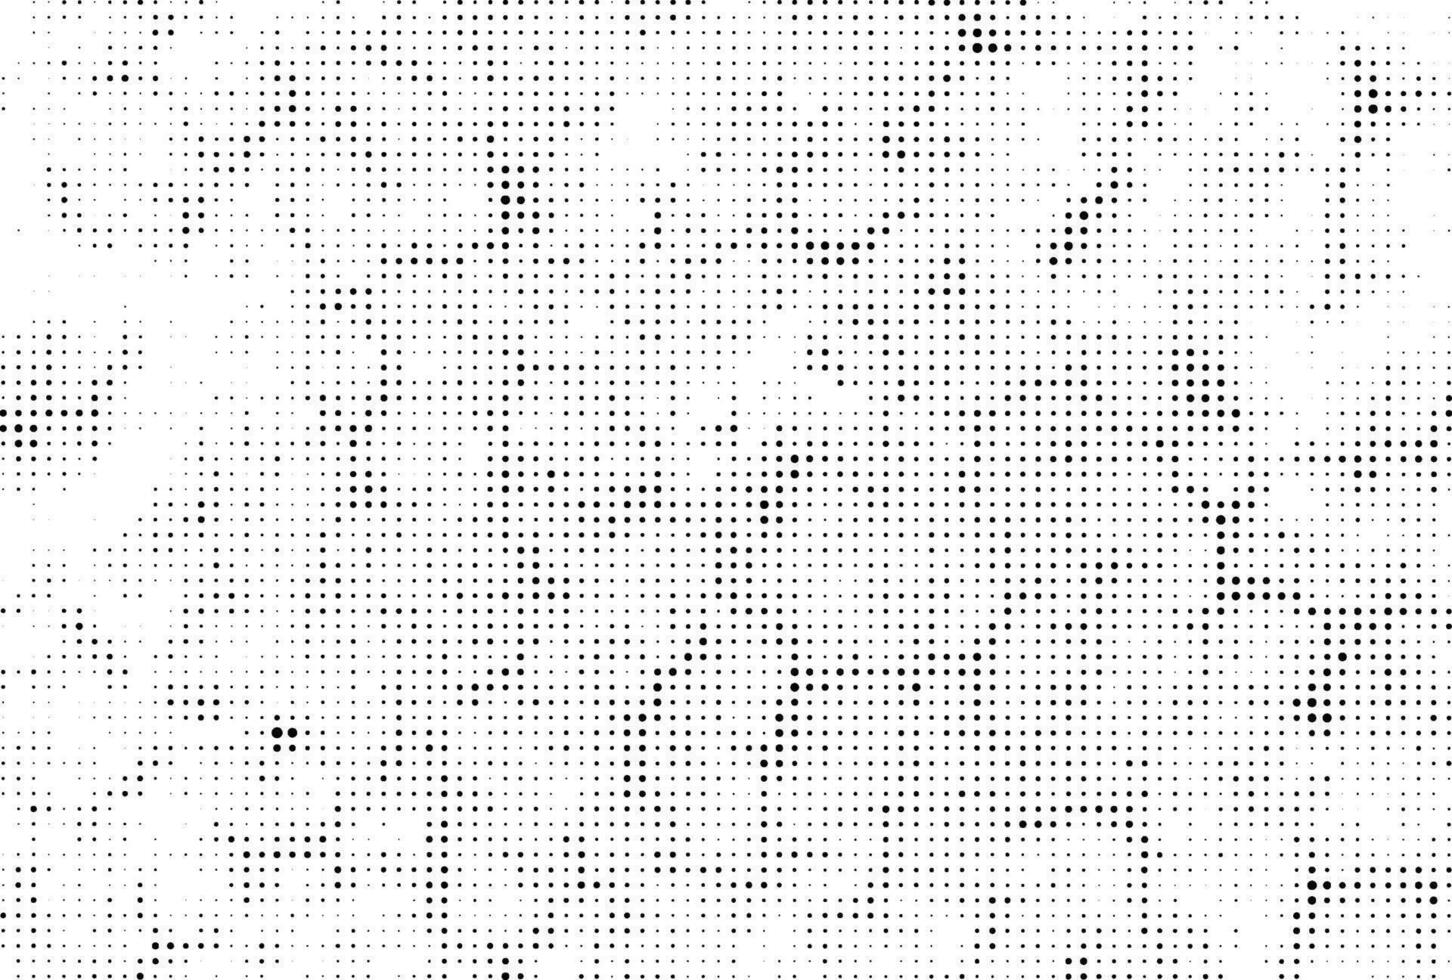 a white and black halftone pattern for design extra effect  grunge dots effect vector